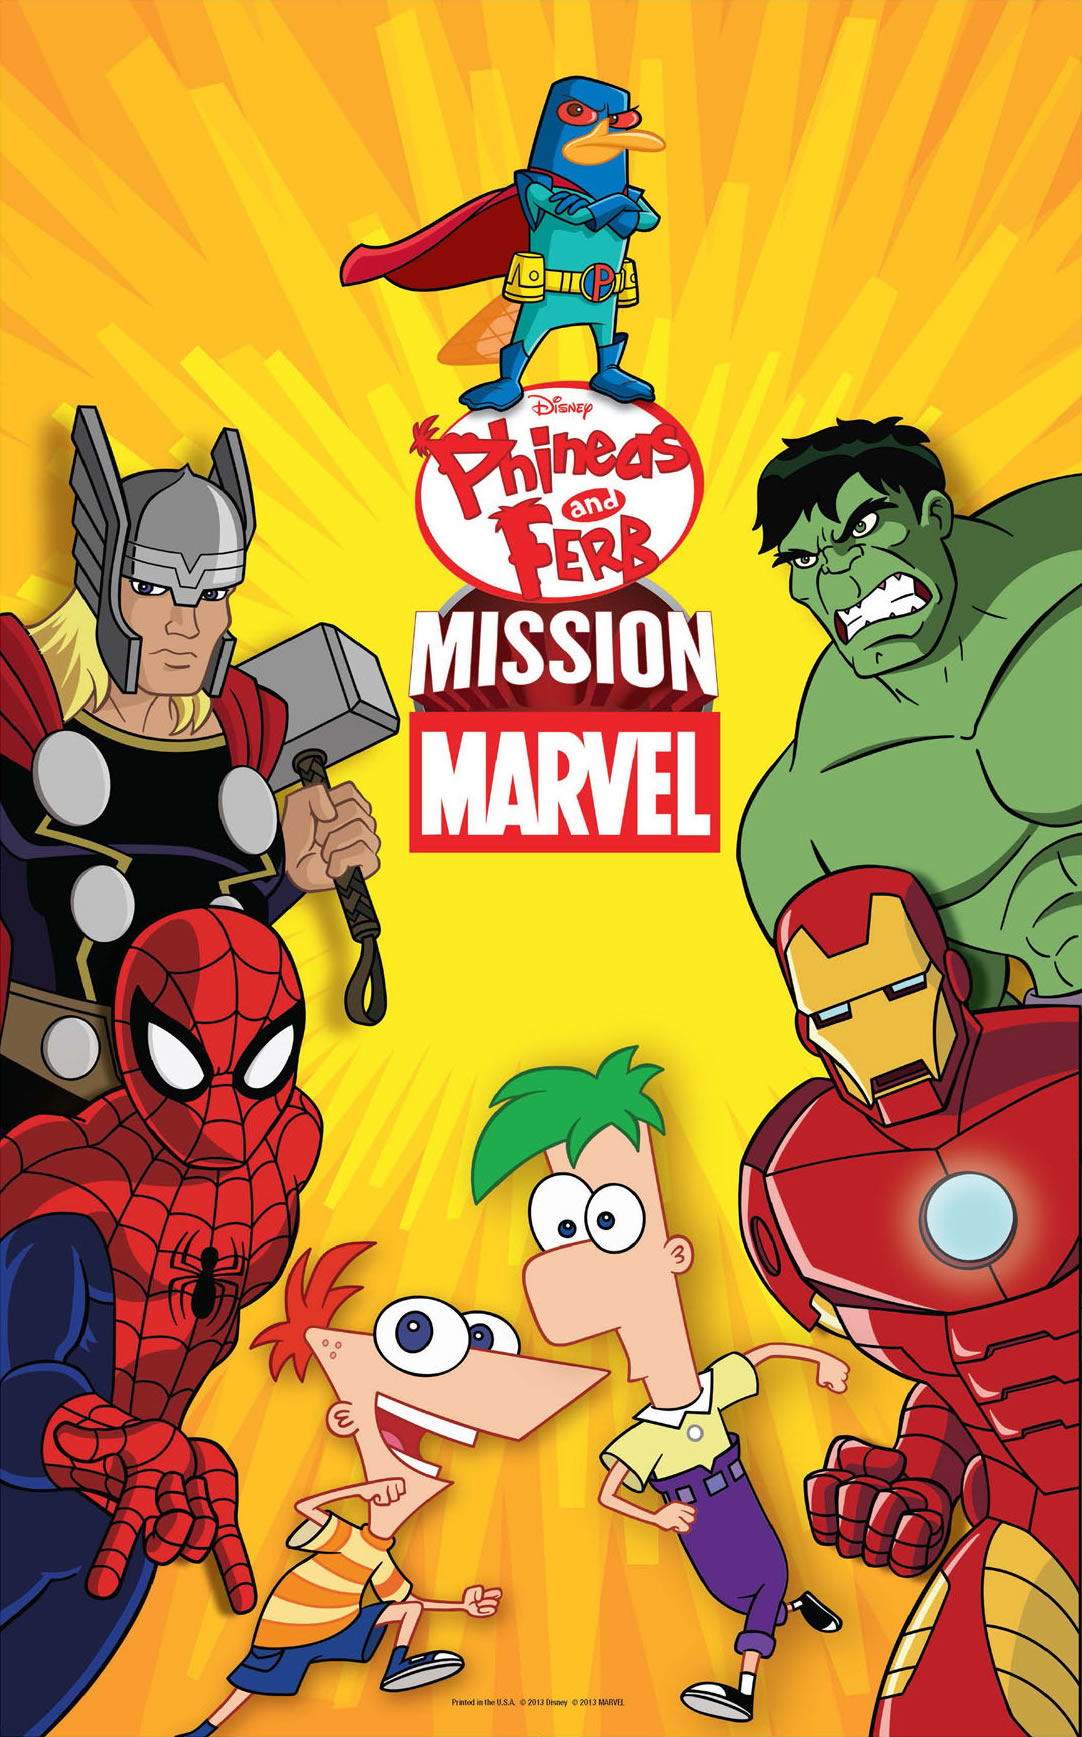 Phineas and Ferb Mission Marvel Poster 02